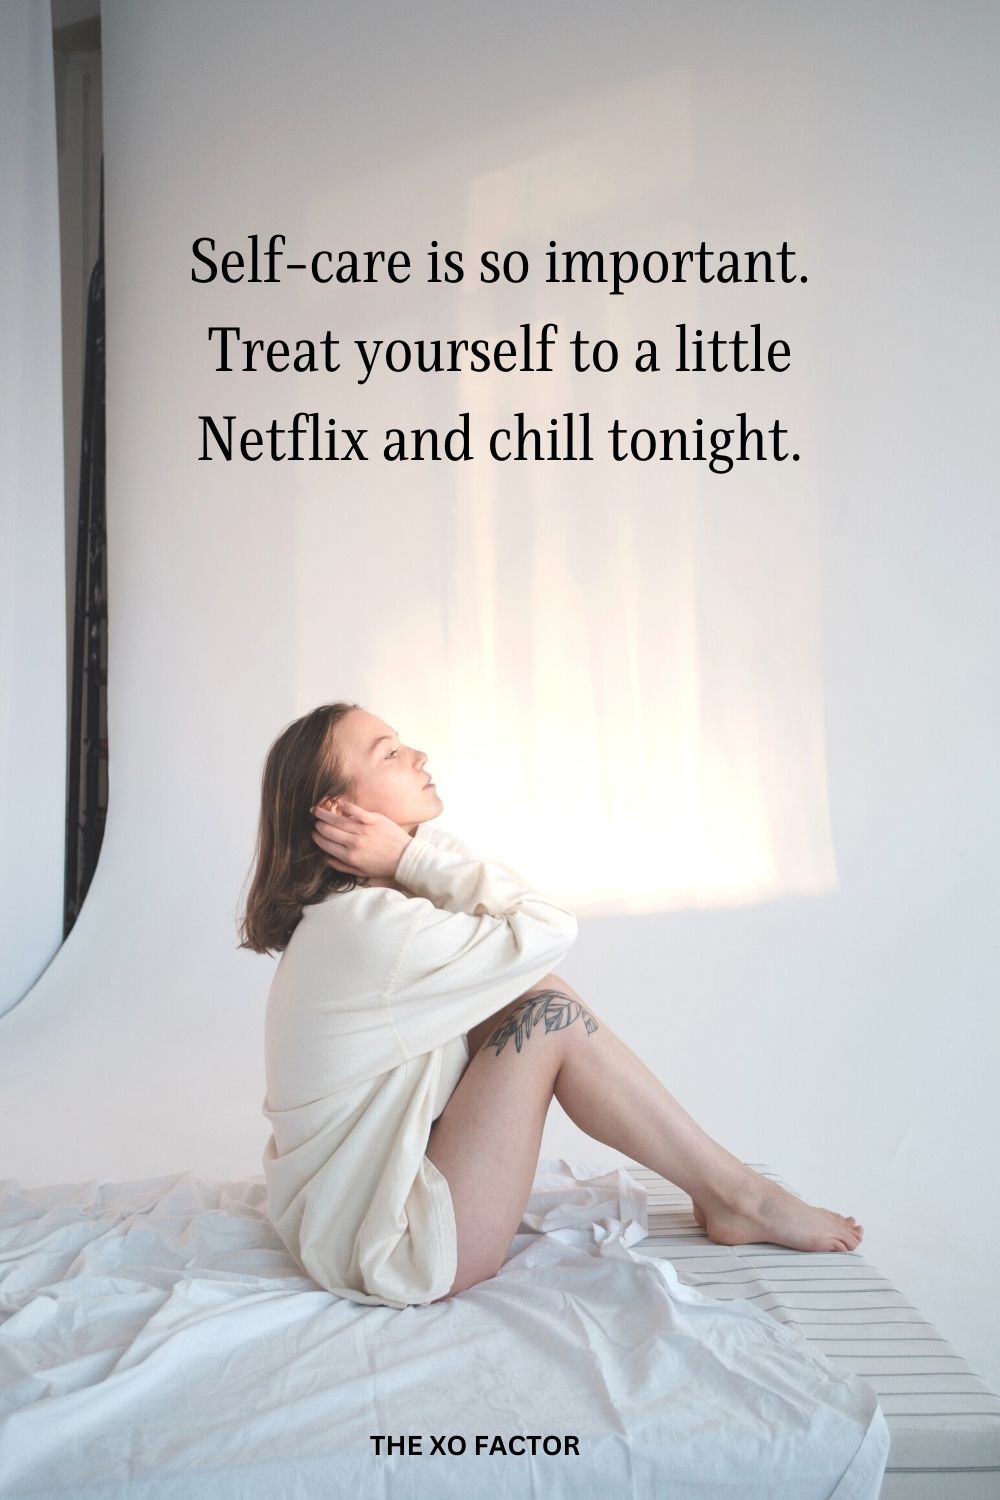 
Self-care is so important. Treat yourself to a little Netflix and chill tonight.

